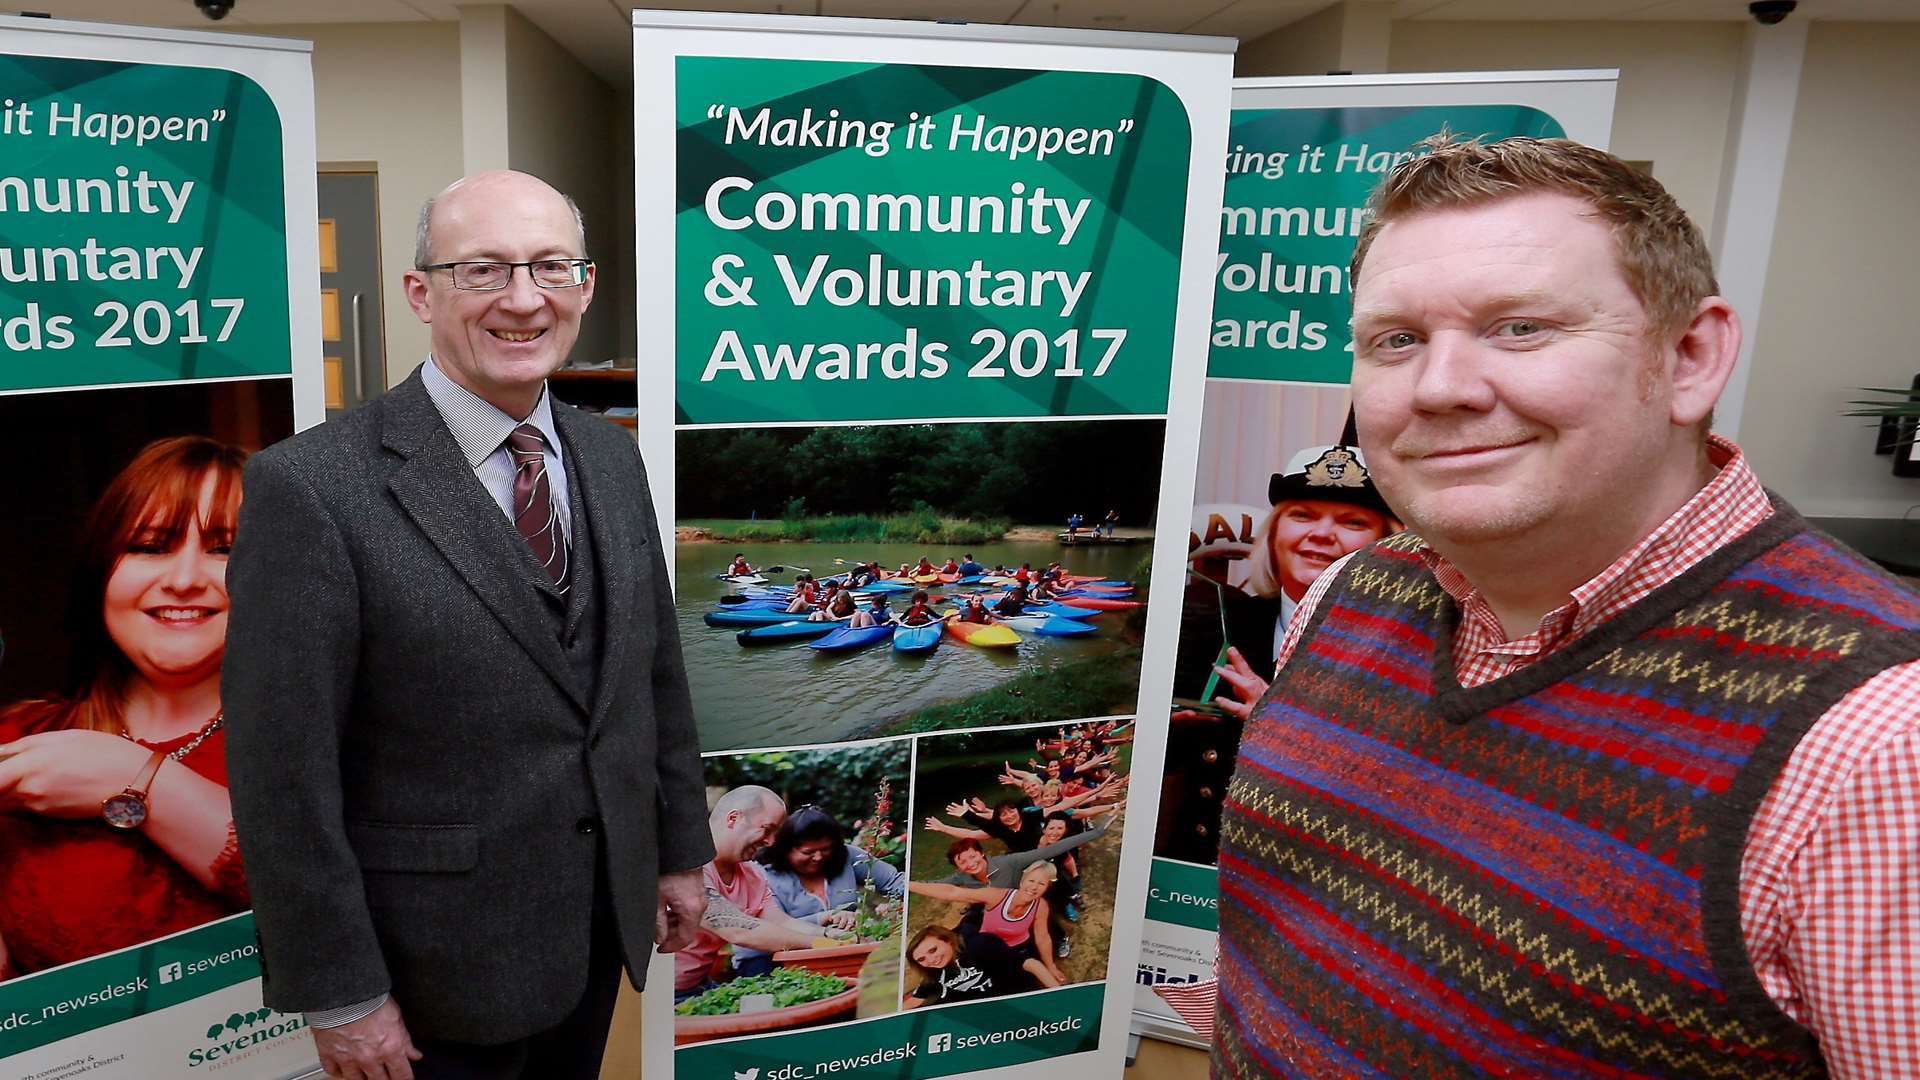 Council Leader, Cllr Peter Fleming and Economic & Community Development Cabinet Member, Cllr Roddy Hogarth launch the awards.